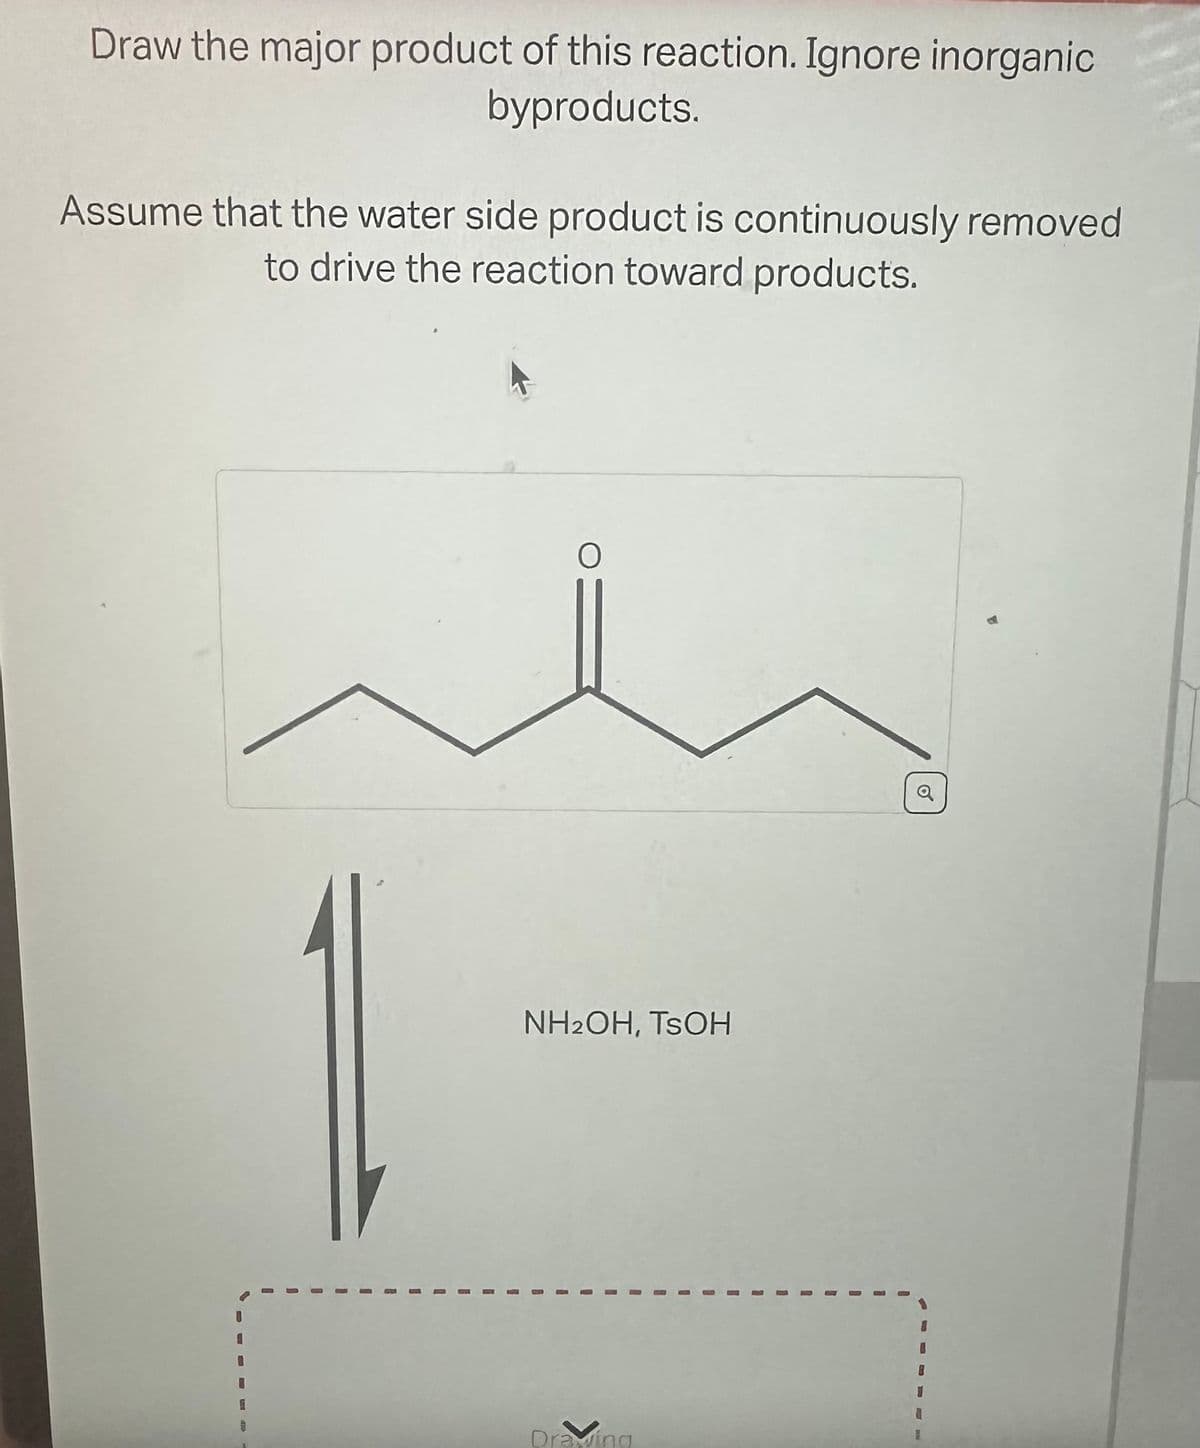 Draw the major product of this reaction. Ignore inorganic
byproducts.
Assume that the water side product is continuously removed
to drive the reaction toward products.
O
NH2OH, TSOH
I
Draving
I
o